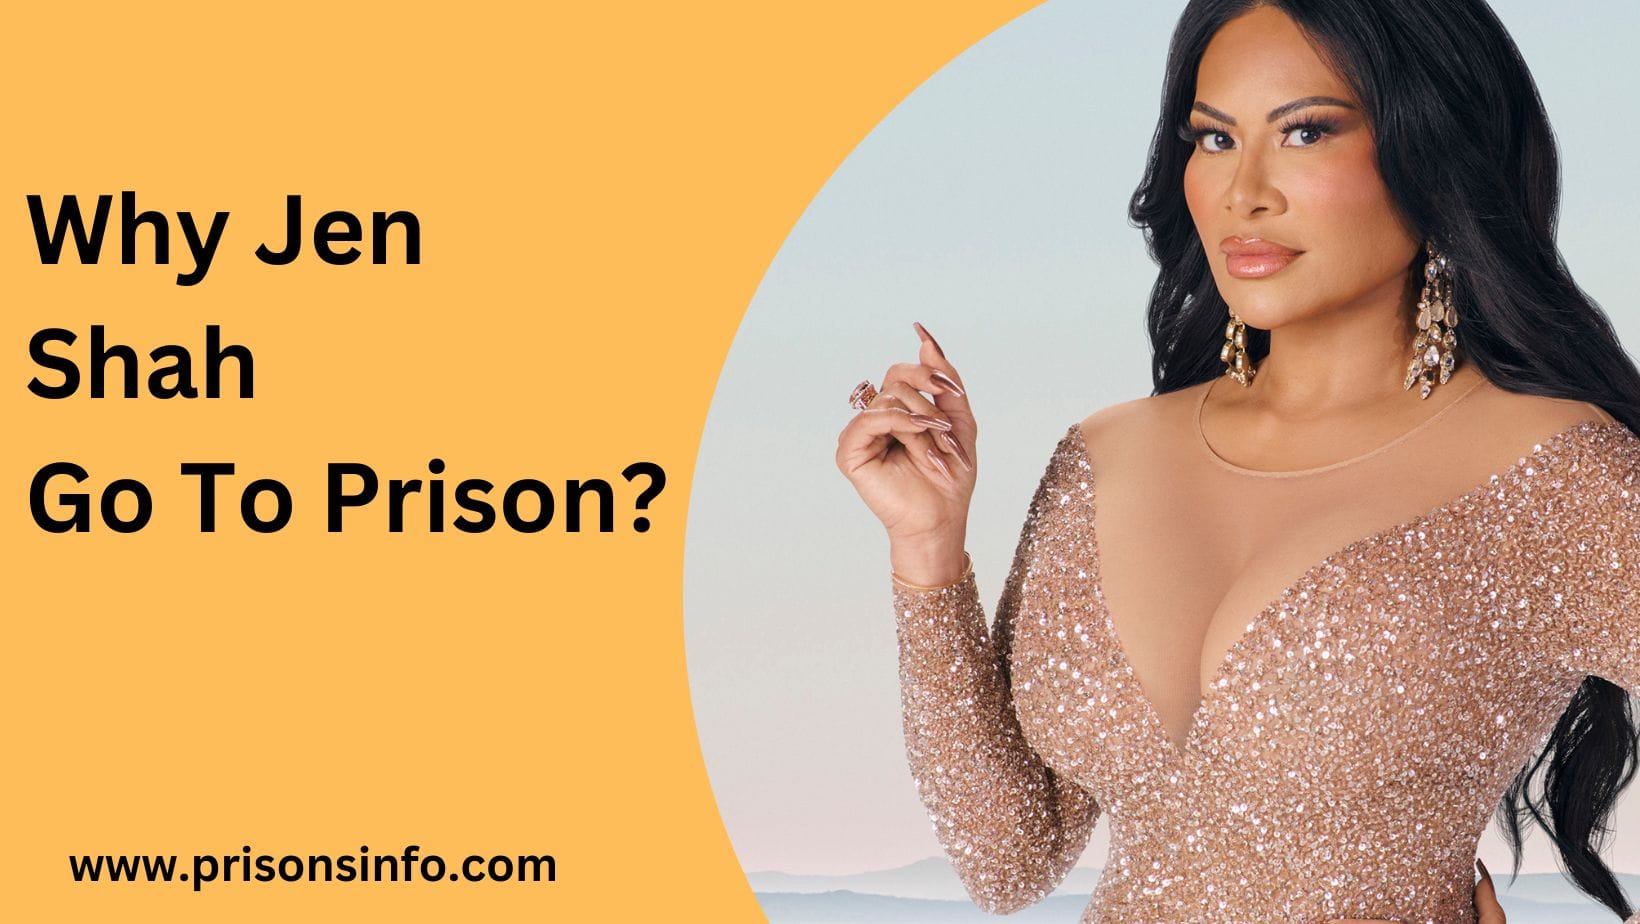 Why Jen Shah go to prison?